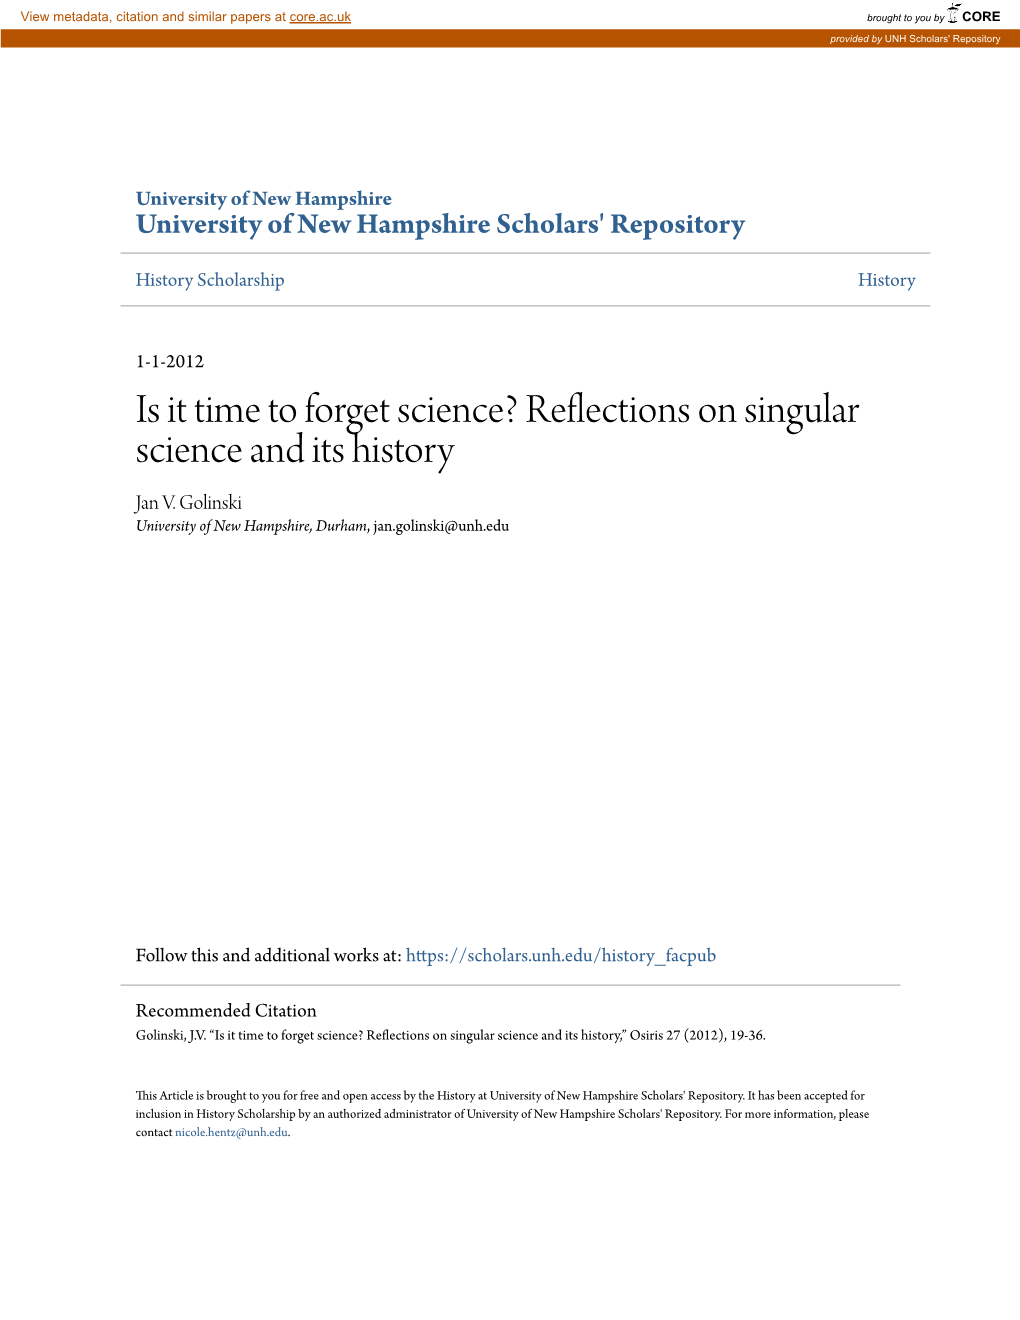 Reflections on Singular Science and Its History Jan V